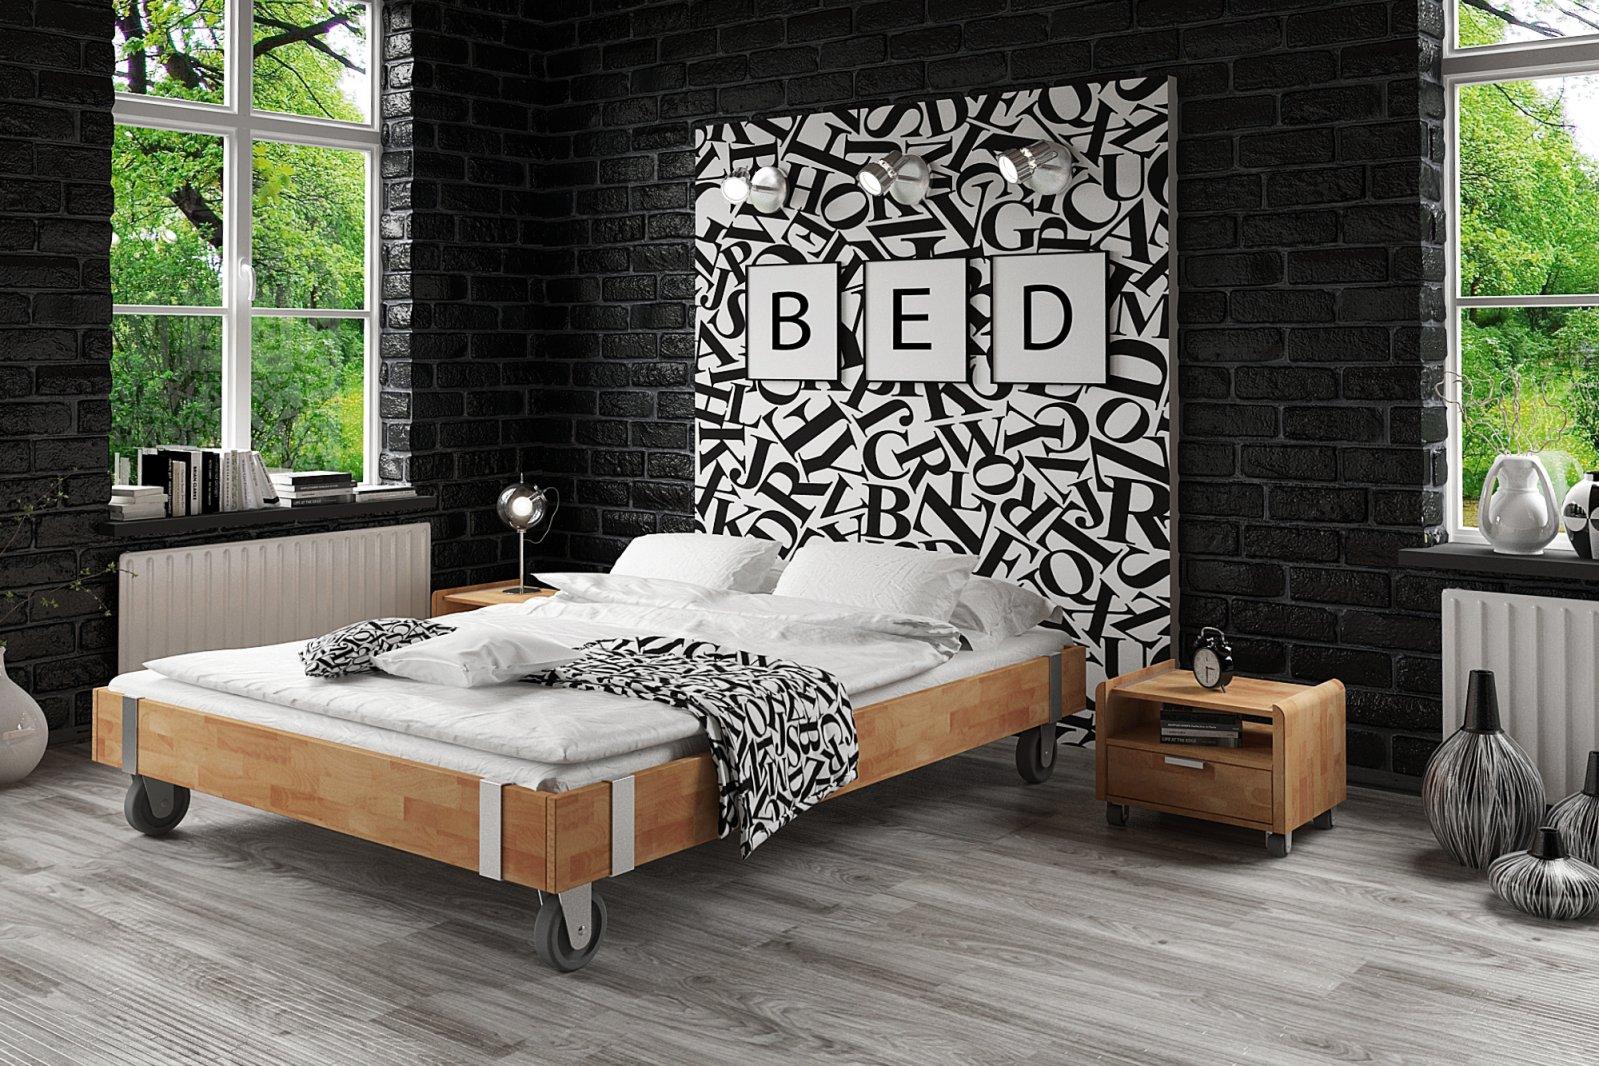 Bed frame on wheels WILL 